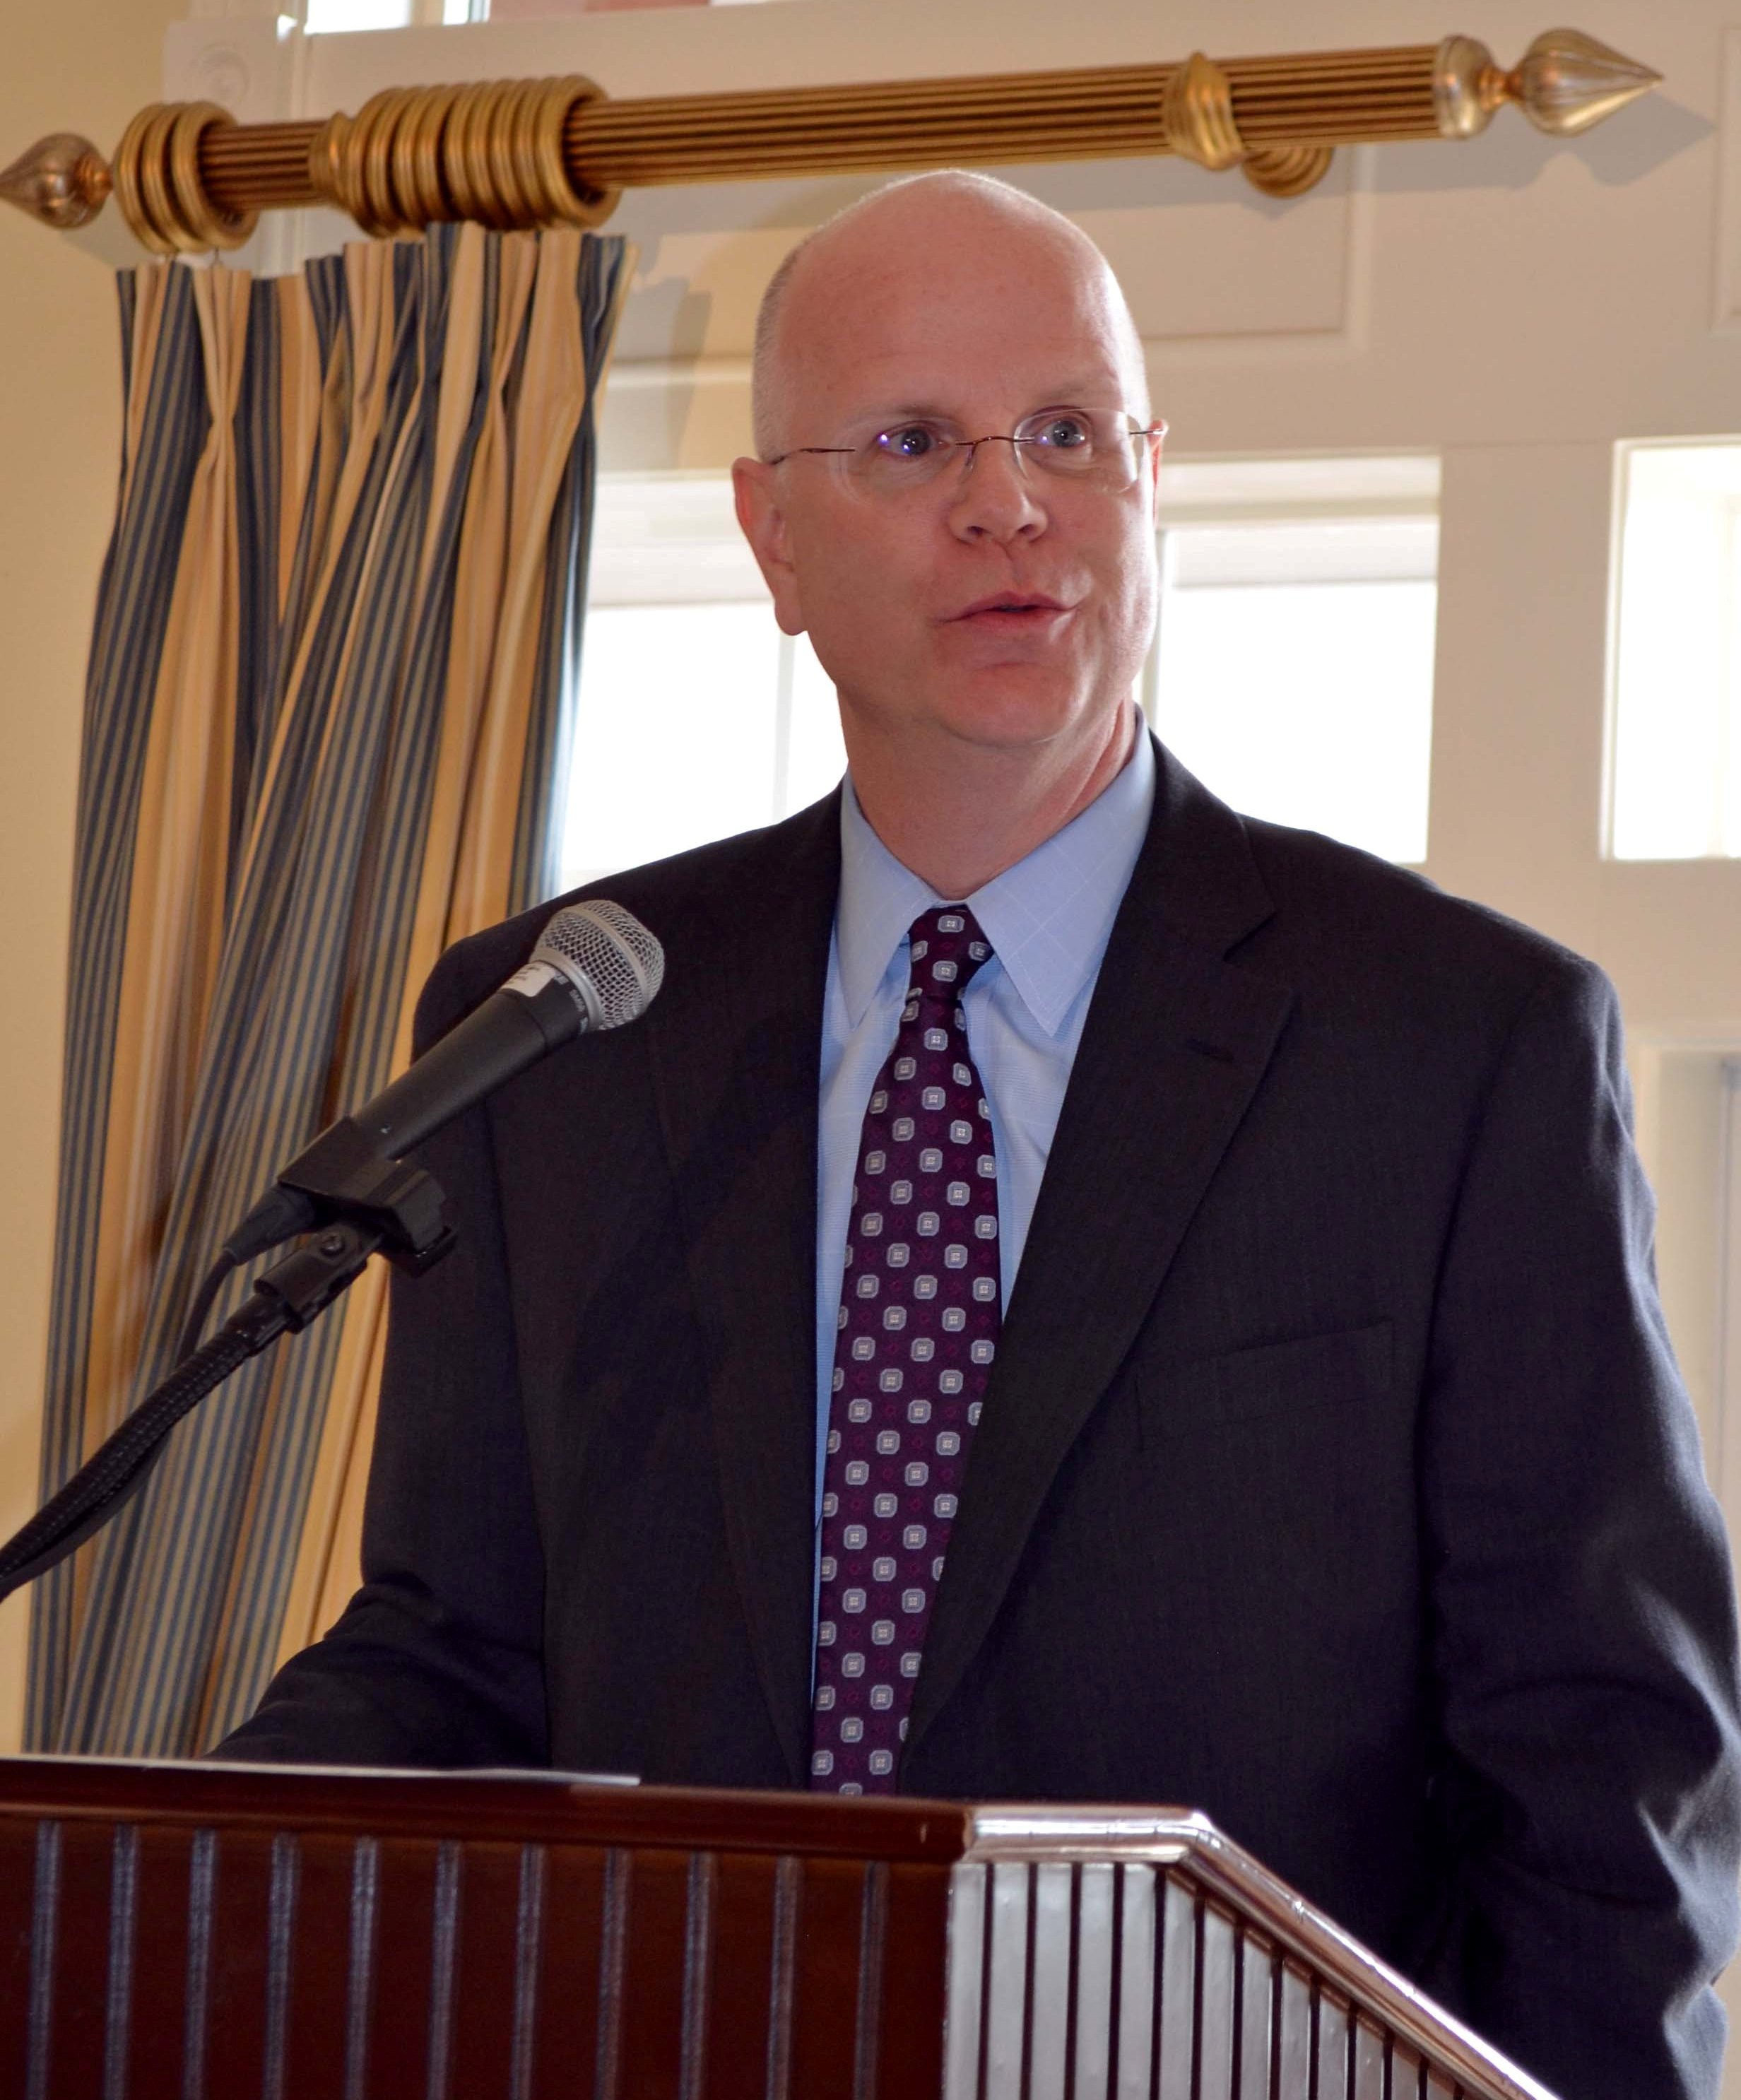 Special guest State Comptroller Kevin Lembo remarks on the value of open government.